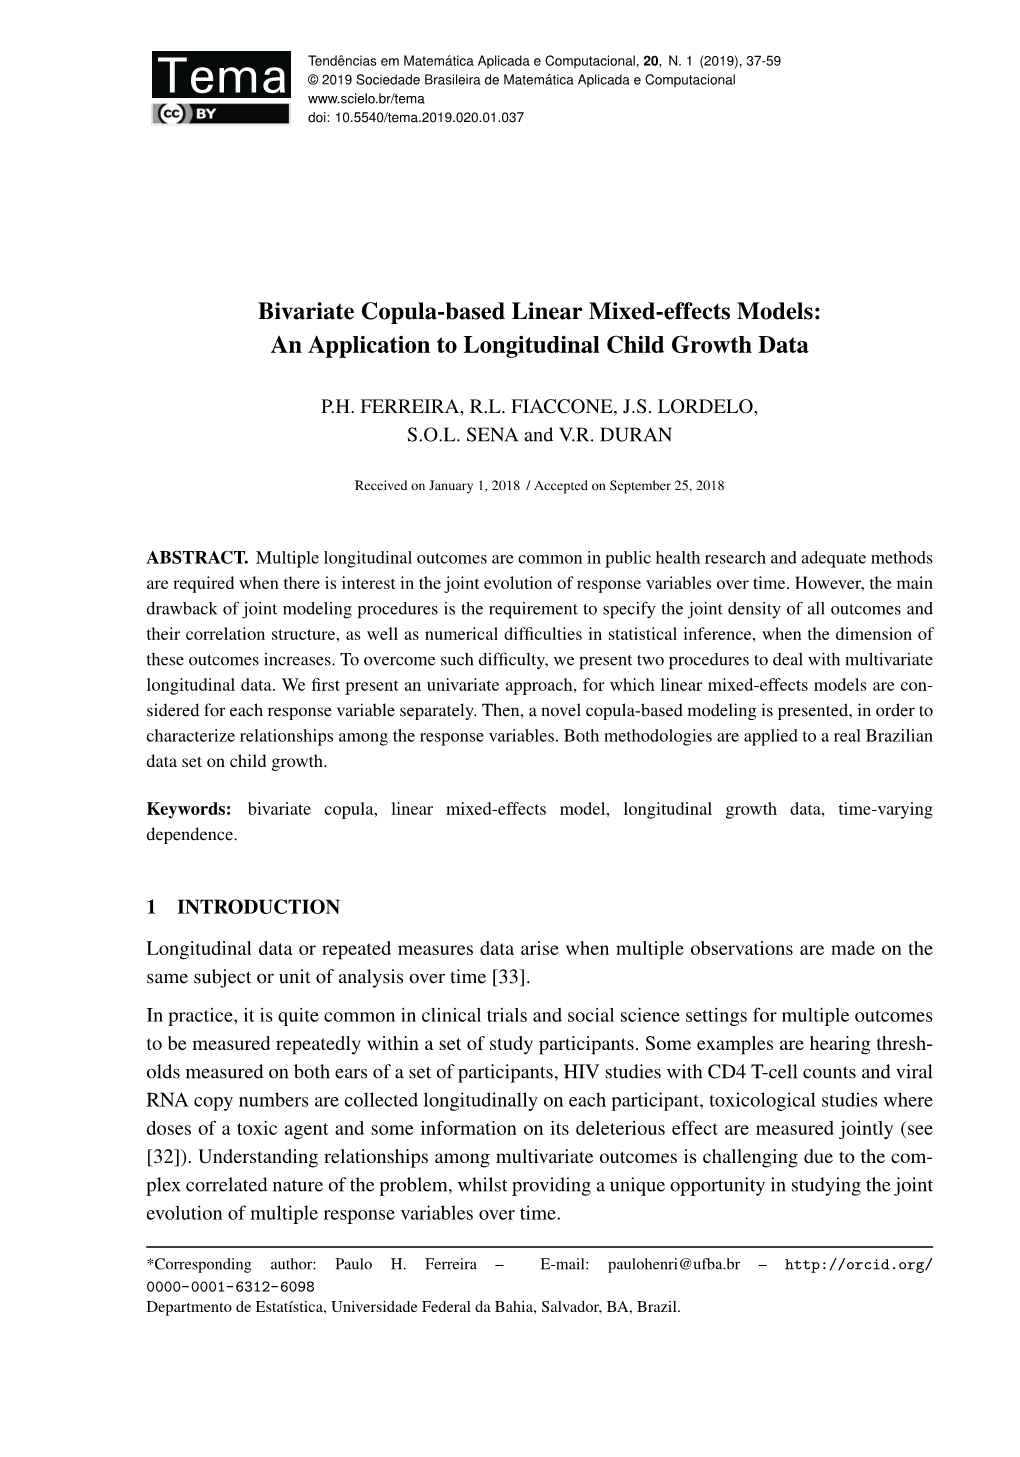 Bivariate Copula-Based Linear Mixed-Effects Models: an Application to Longitudinal Child Growth Data